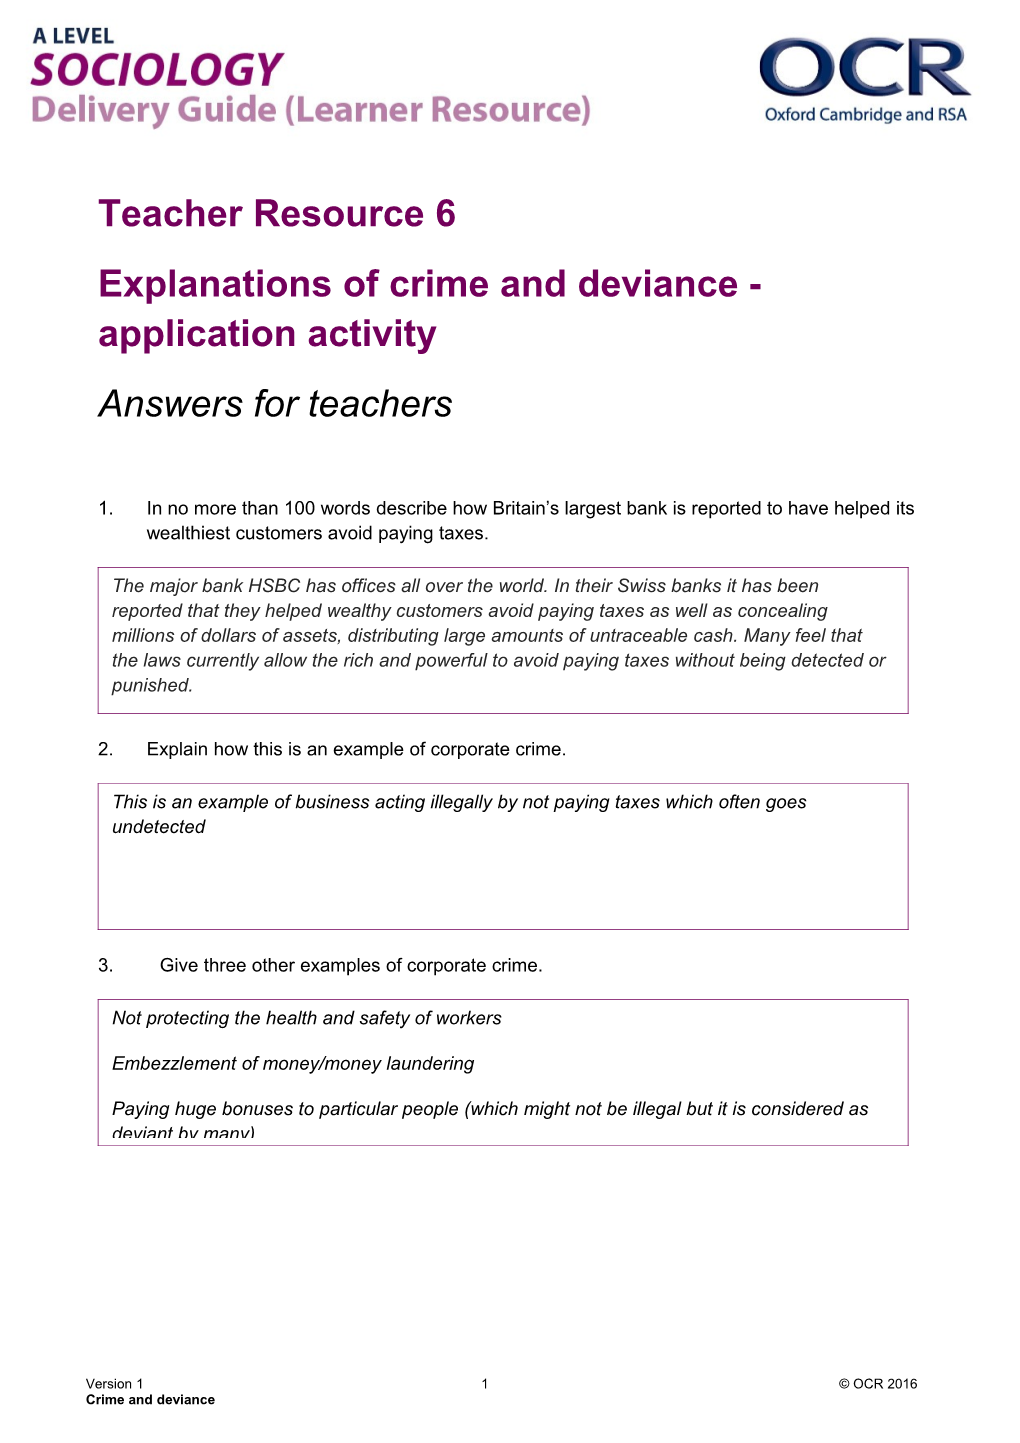 OCR a Level Sociology Delivery Guide Teacher Resource Activity 6